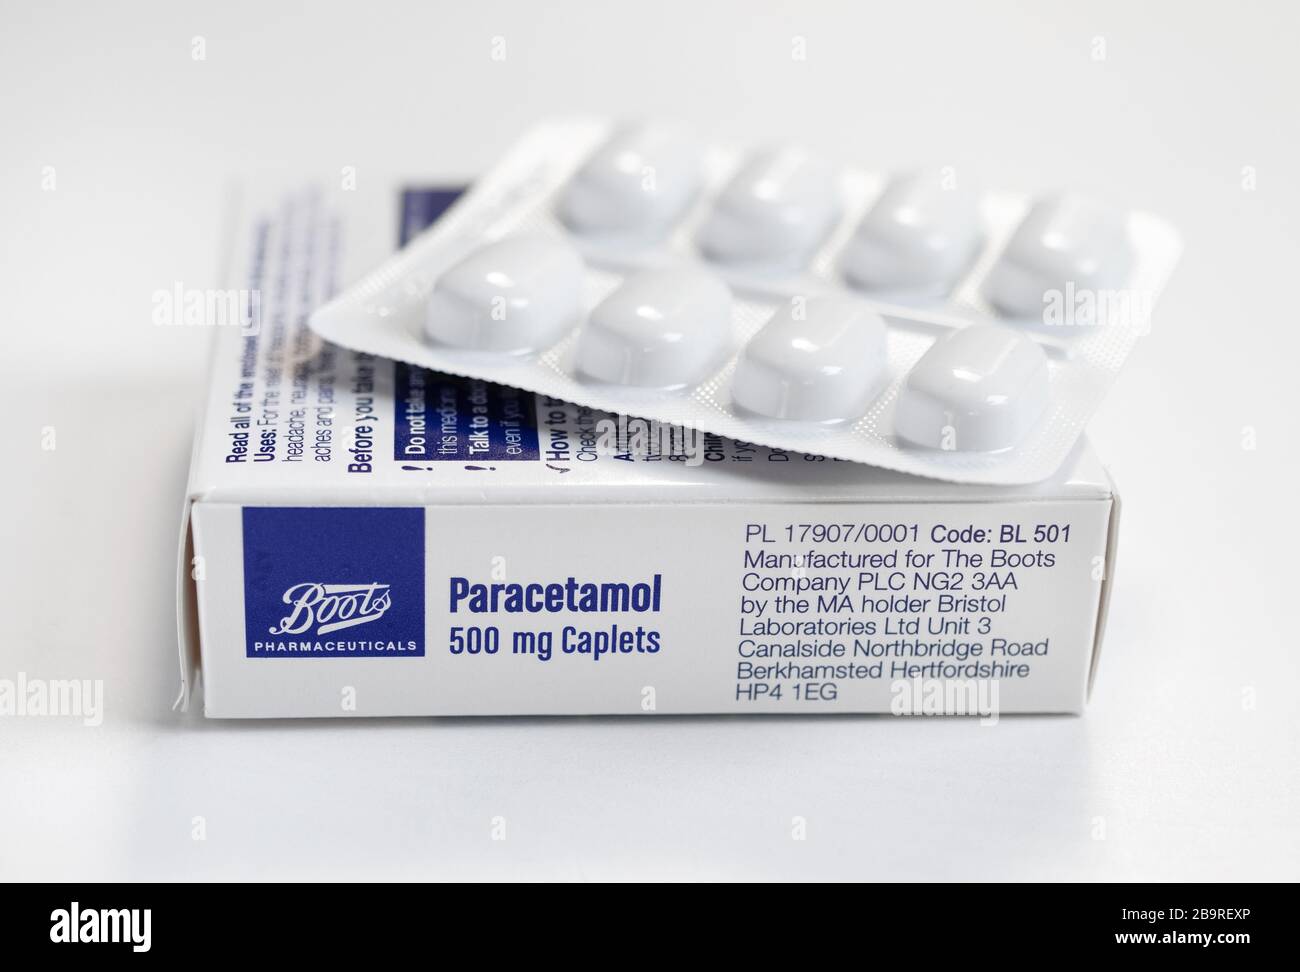 London / UK - March 22nd 2020 - Packet of Paracetamol painkillers from Boots pharmacy, closeup with a shallow depth of field Stock Photo